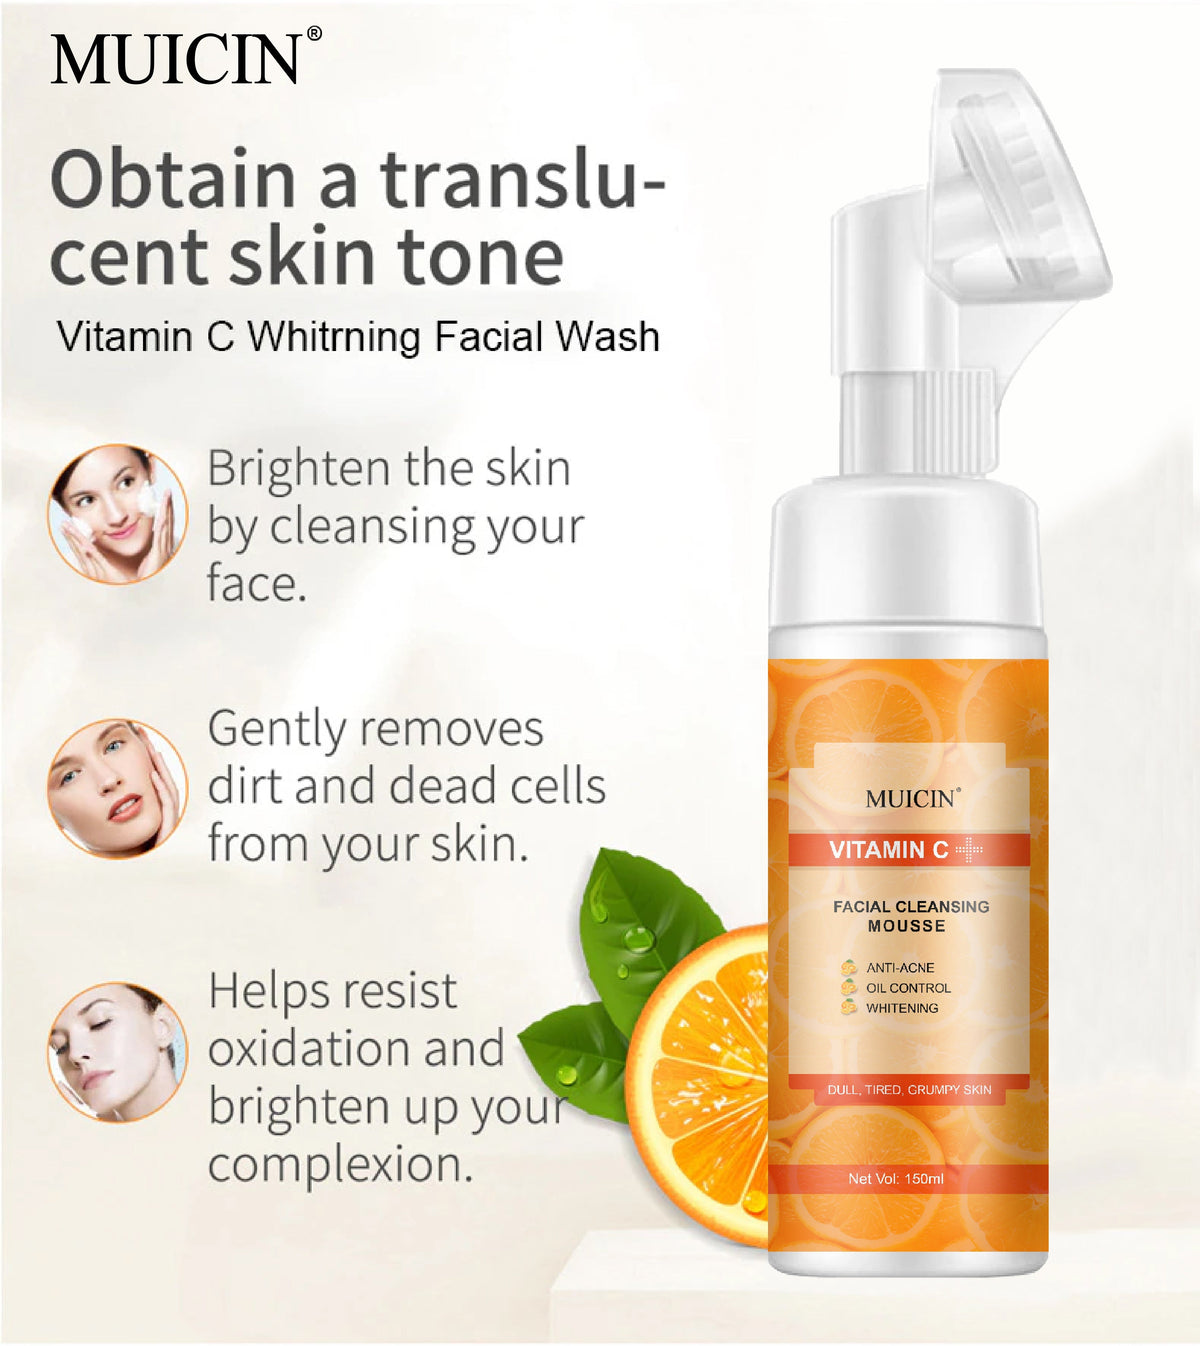 Buy  MUICIN - Vitamin C Bubble Foaming Facial Cleanser - 150ml - at Best Price Online in Pakistan